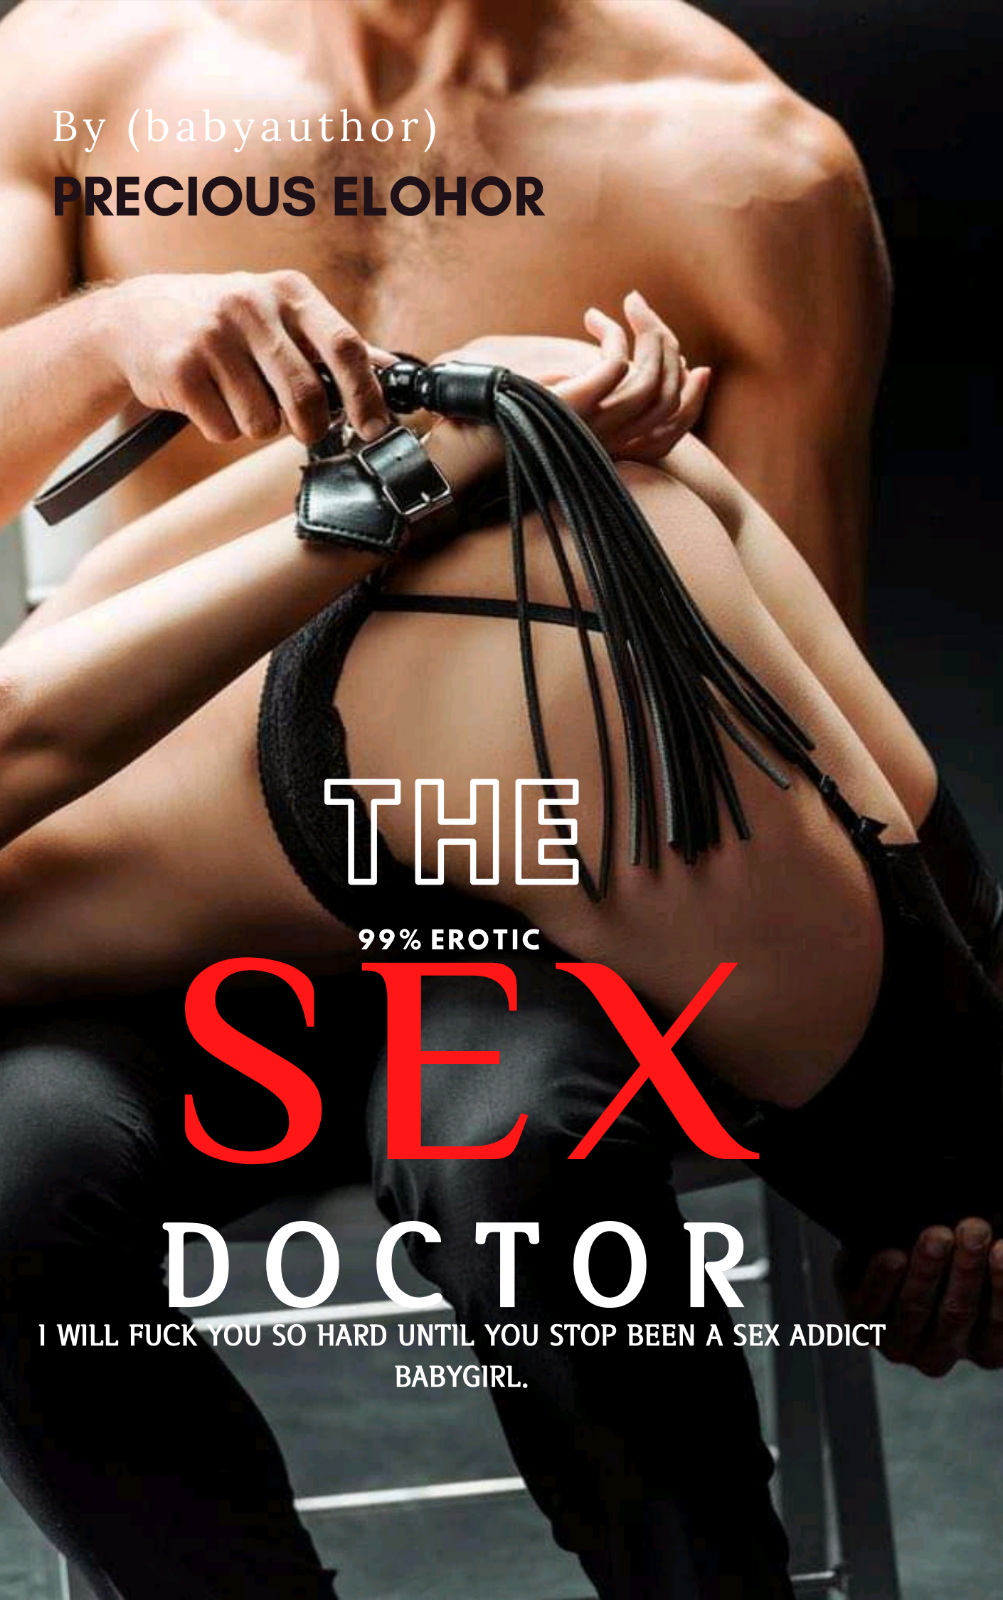 THE SEX DOCTOR HIS SUBMISSIVE (18+) Novel Full Story Book